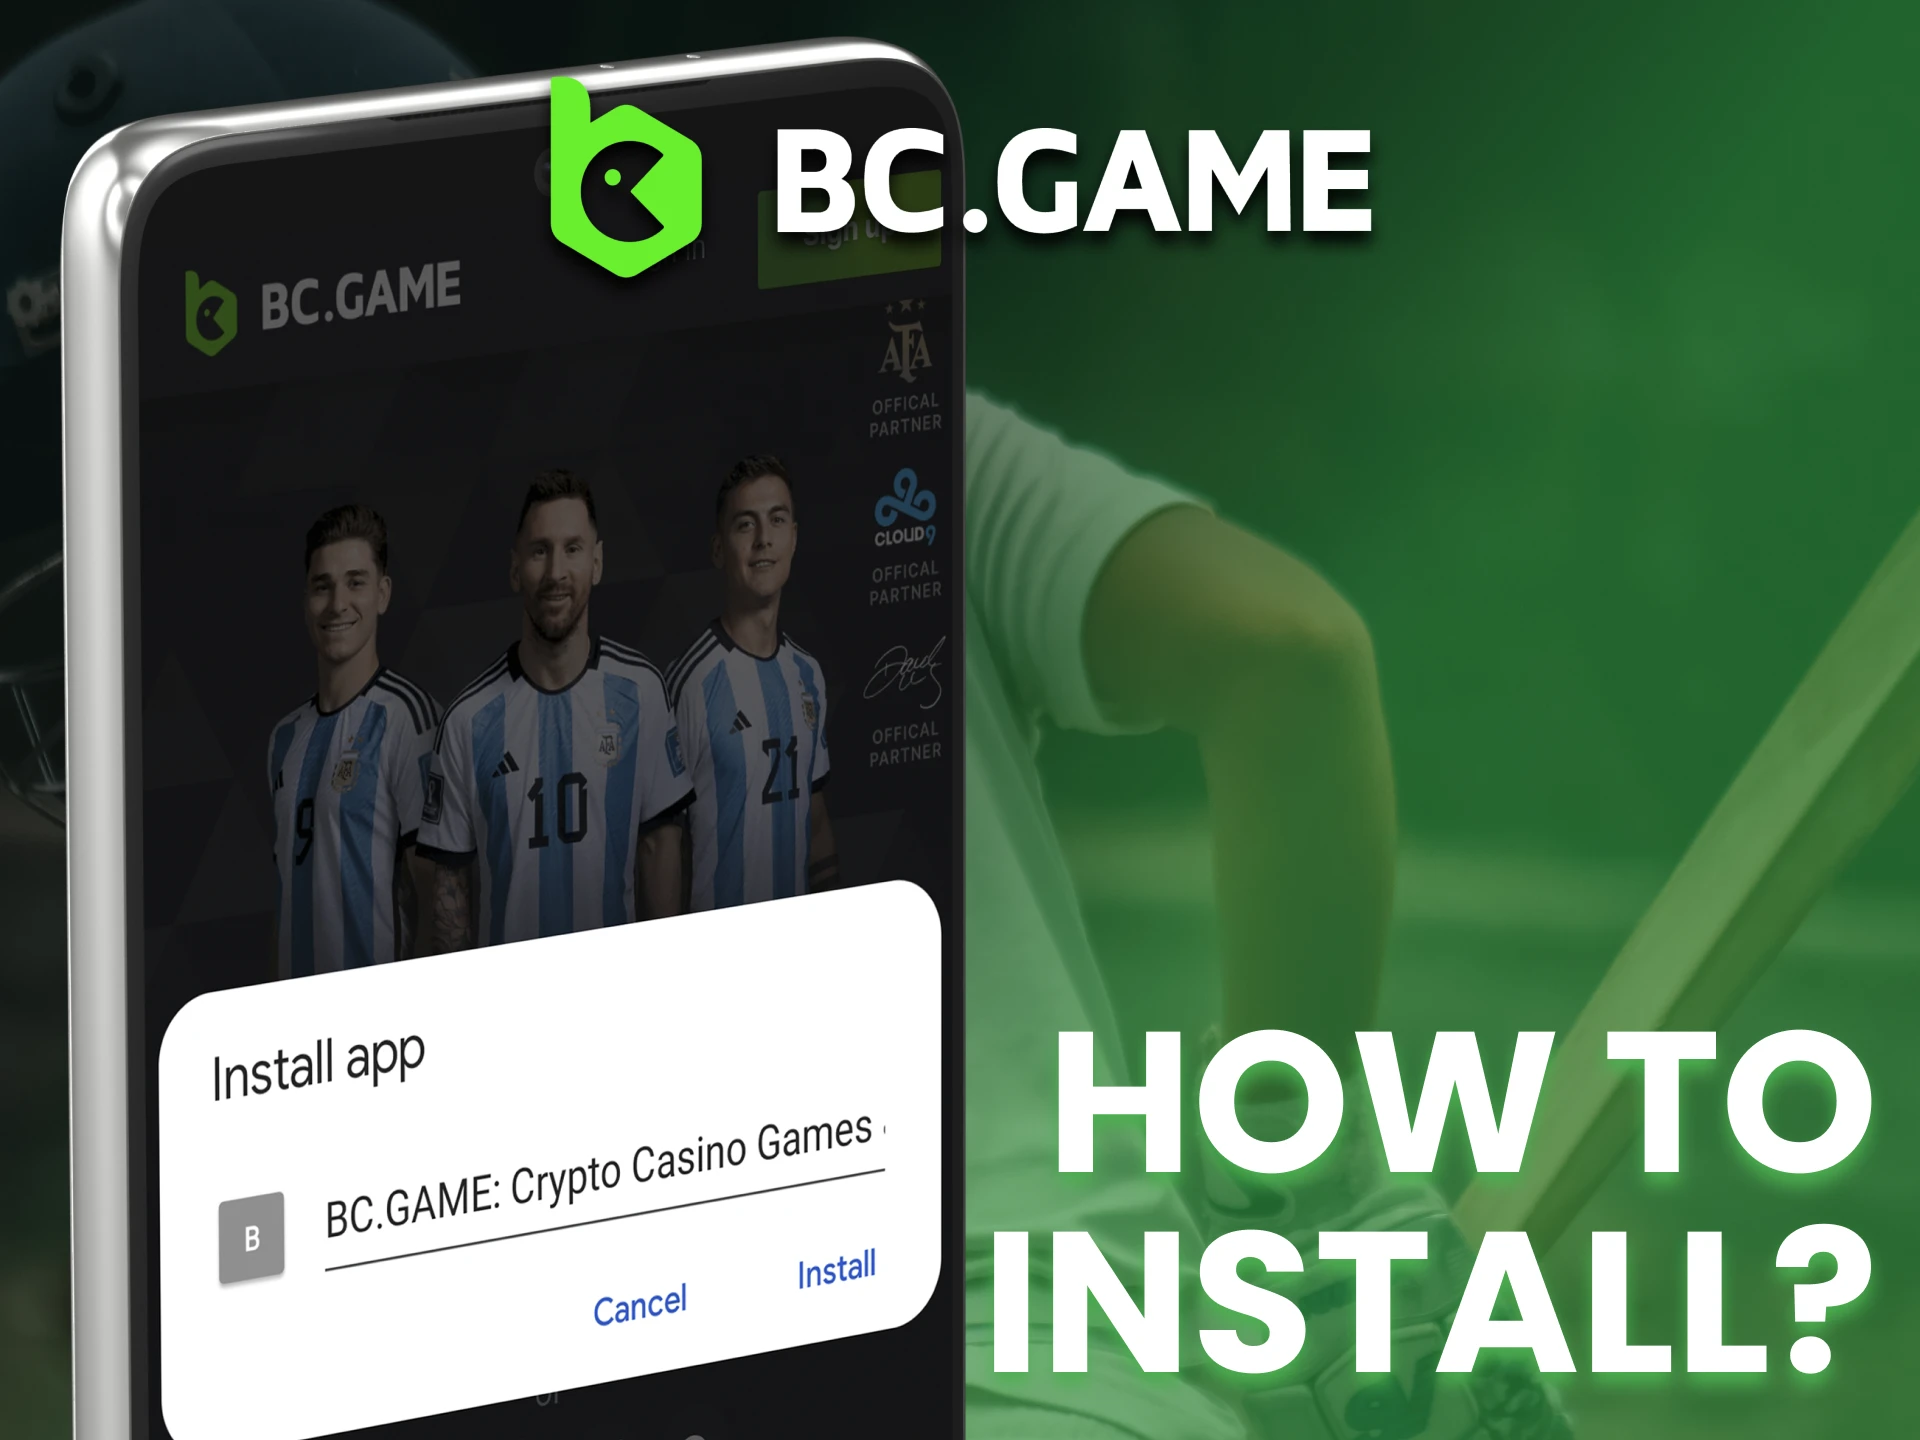 Download and install BC Game app.